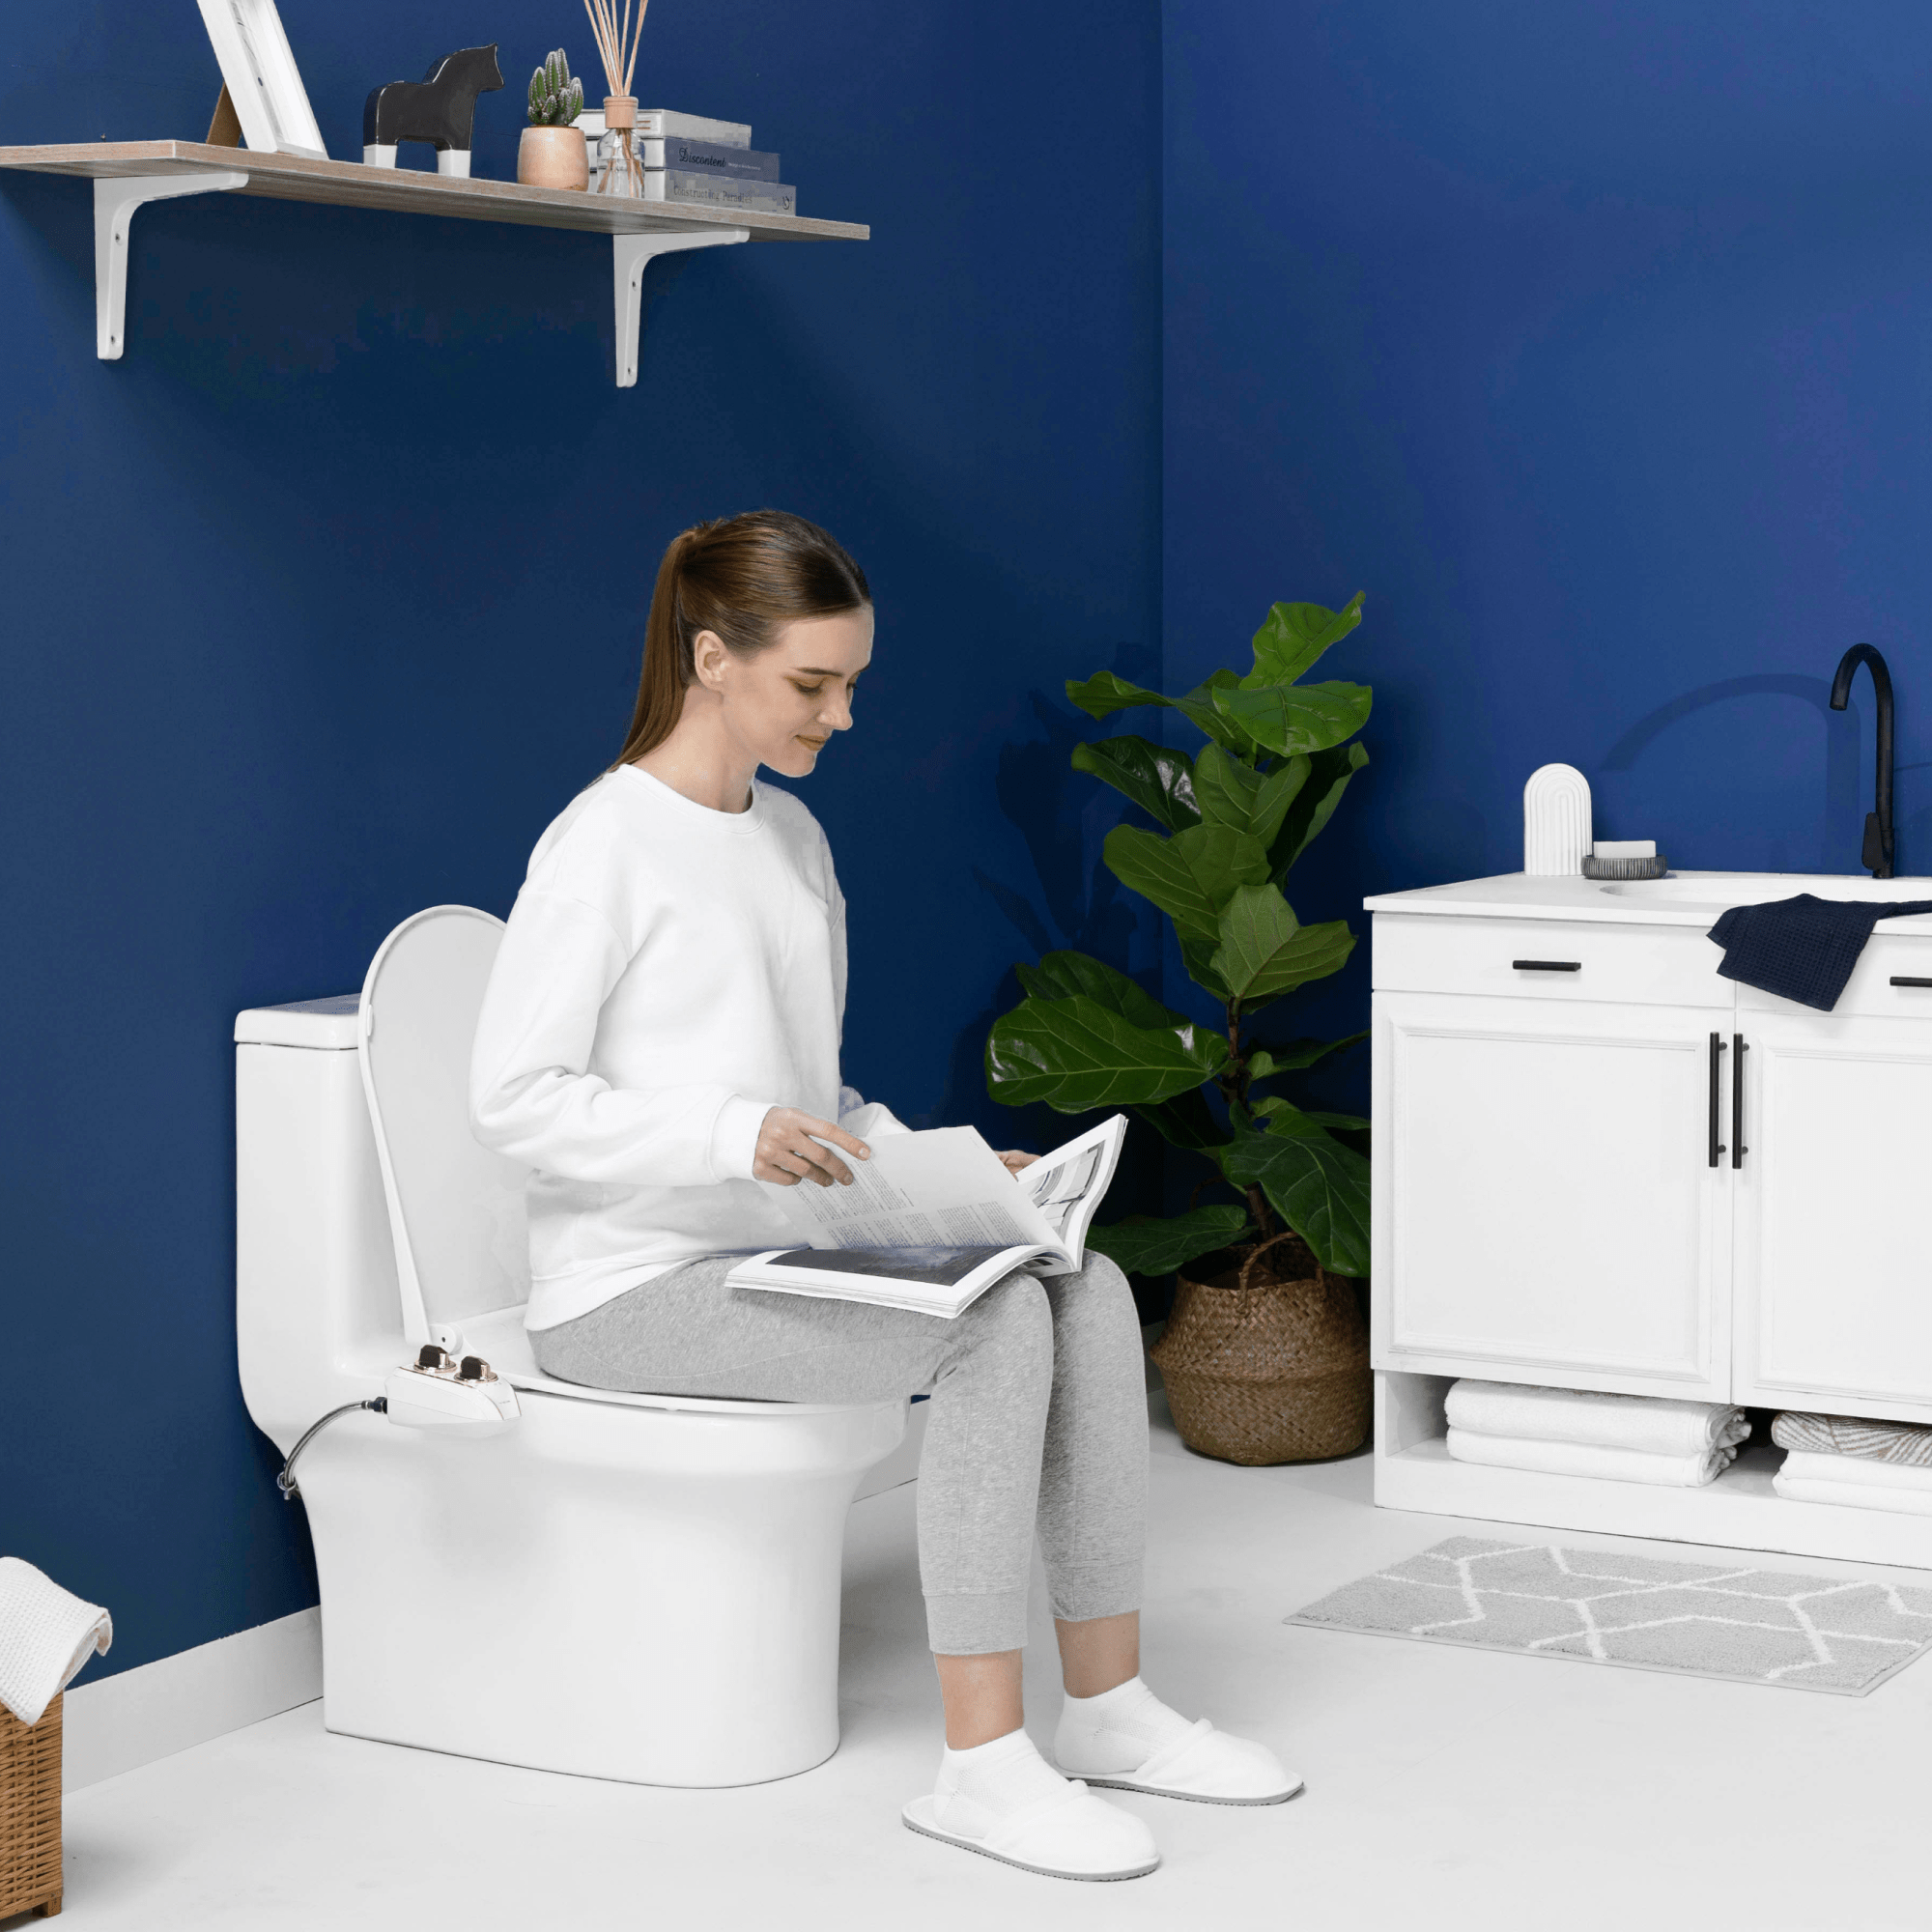 NEO 120 Plus Rose Gold installed, with a person sitting on the toilet reading, in a modern blue bathroom